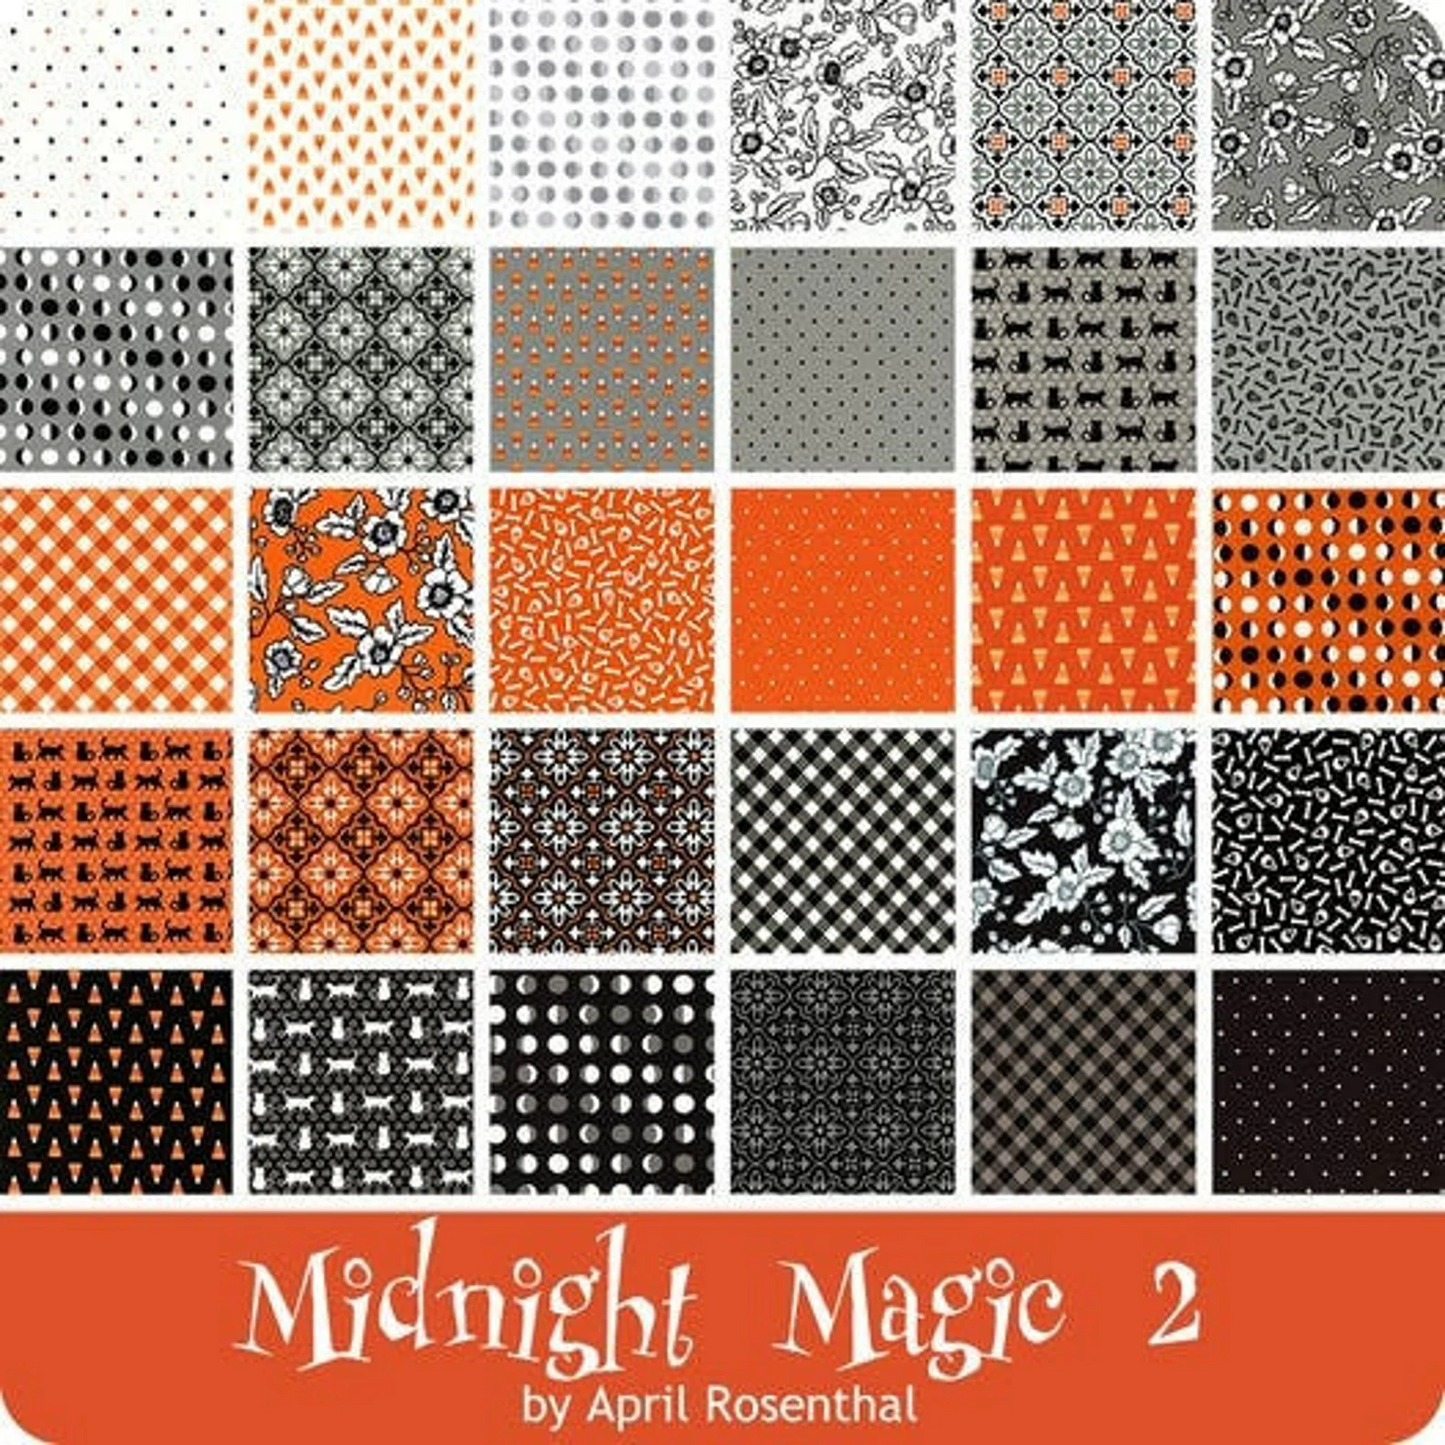 MIDNIGHT MAGIC 2 - 2.5" Jelly Roll by APRIL ROSENTHAL